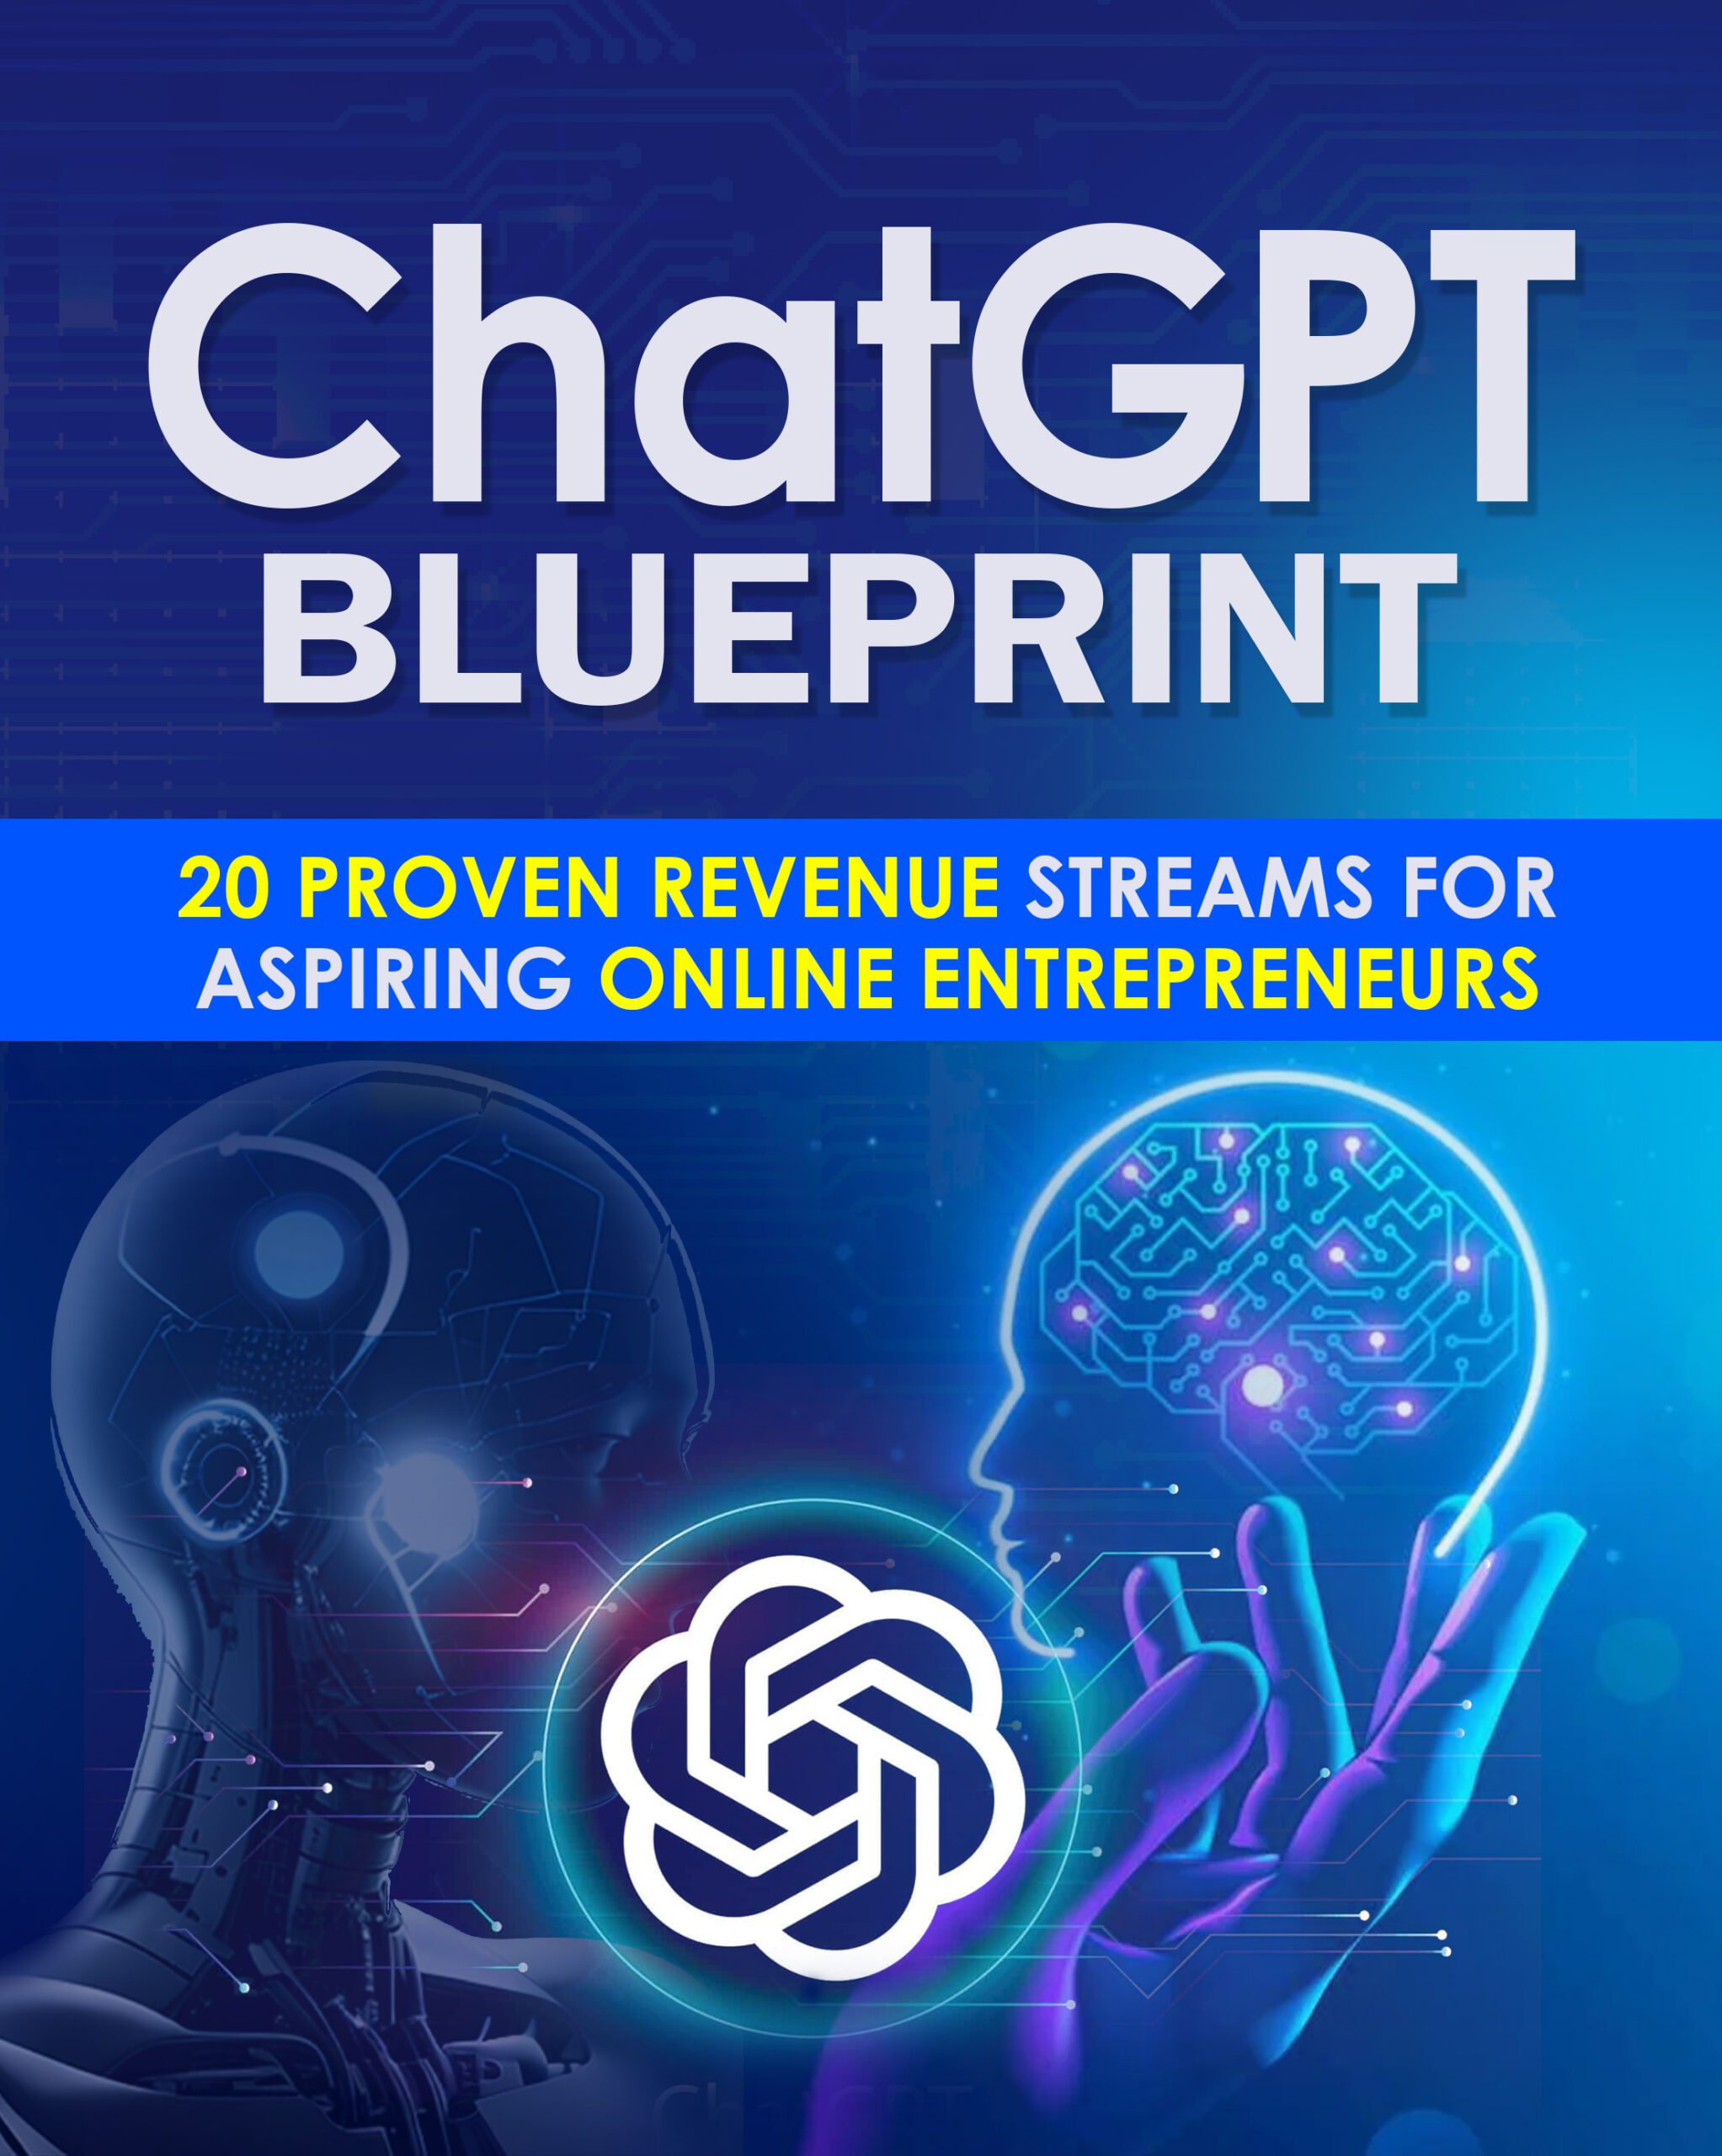 Cover of 'ChatGPT Blueprint: 20 Ways to Profit from ChatGPT,' featuring a digital brain and symbols of growth, highlighting strategies for monetizing ChatGPT in business.